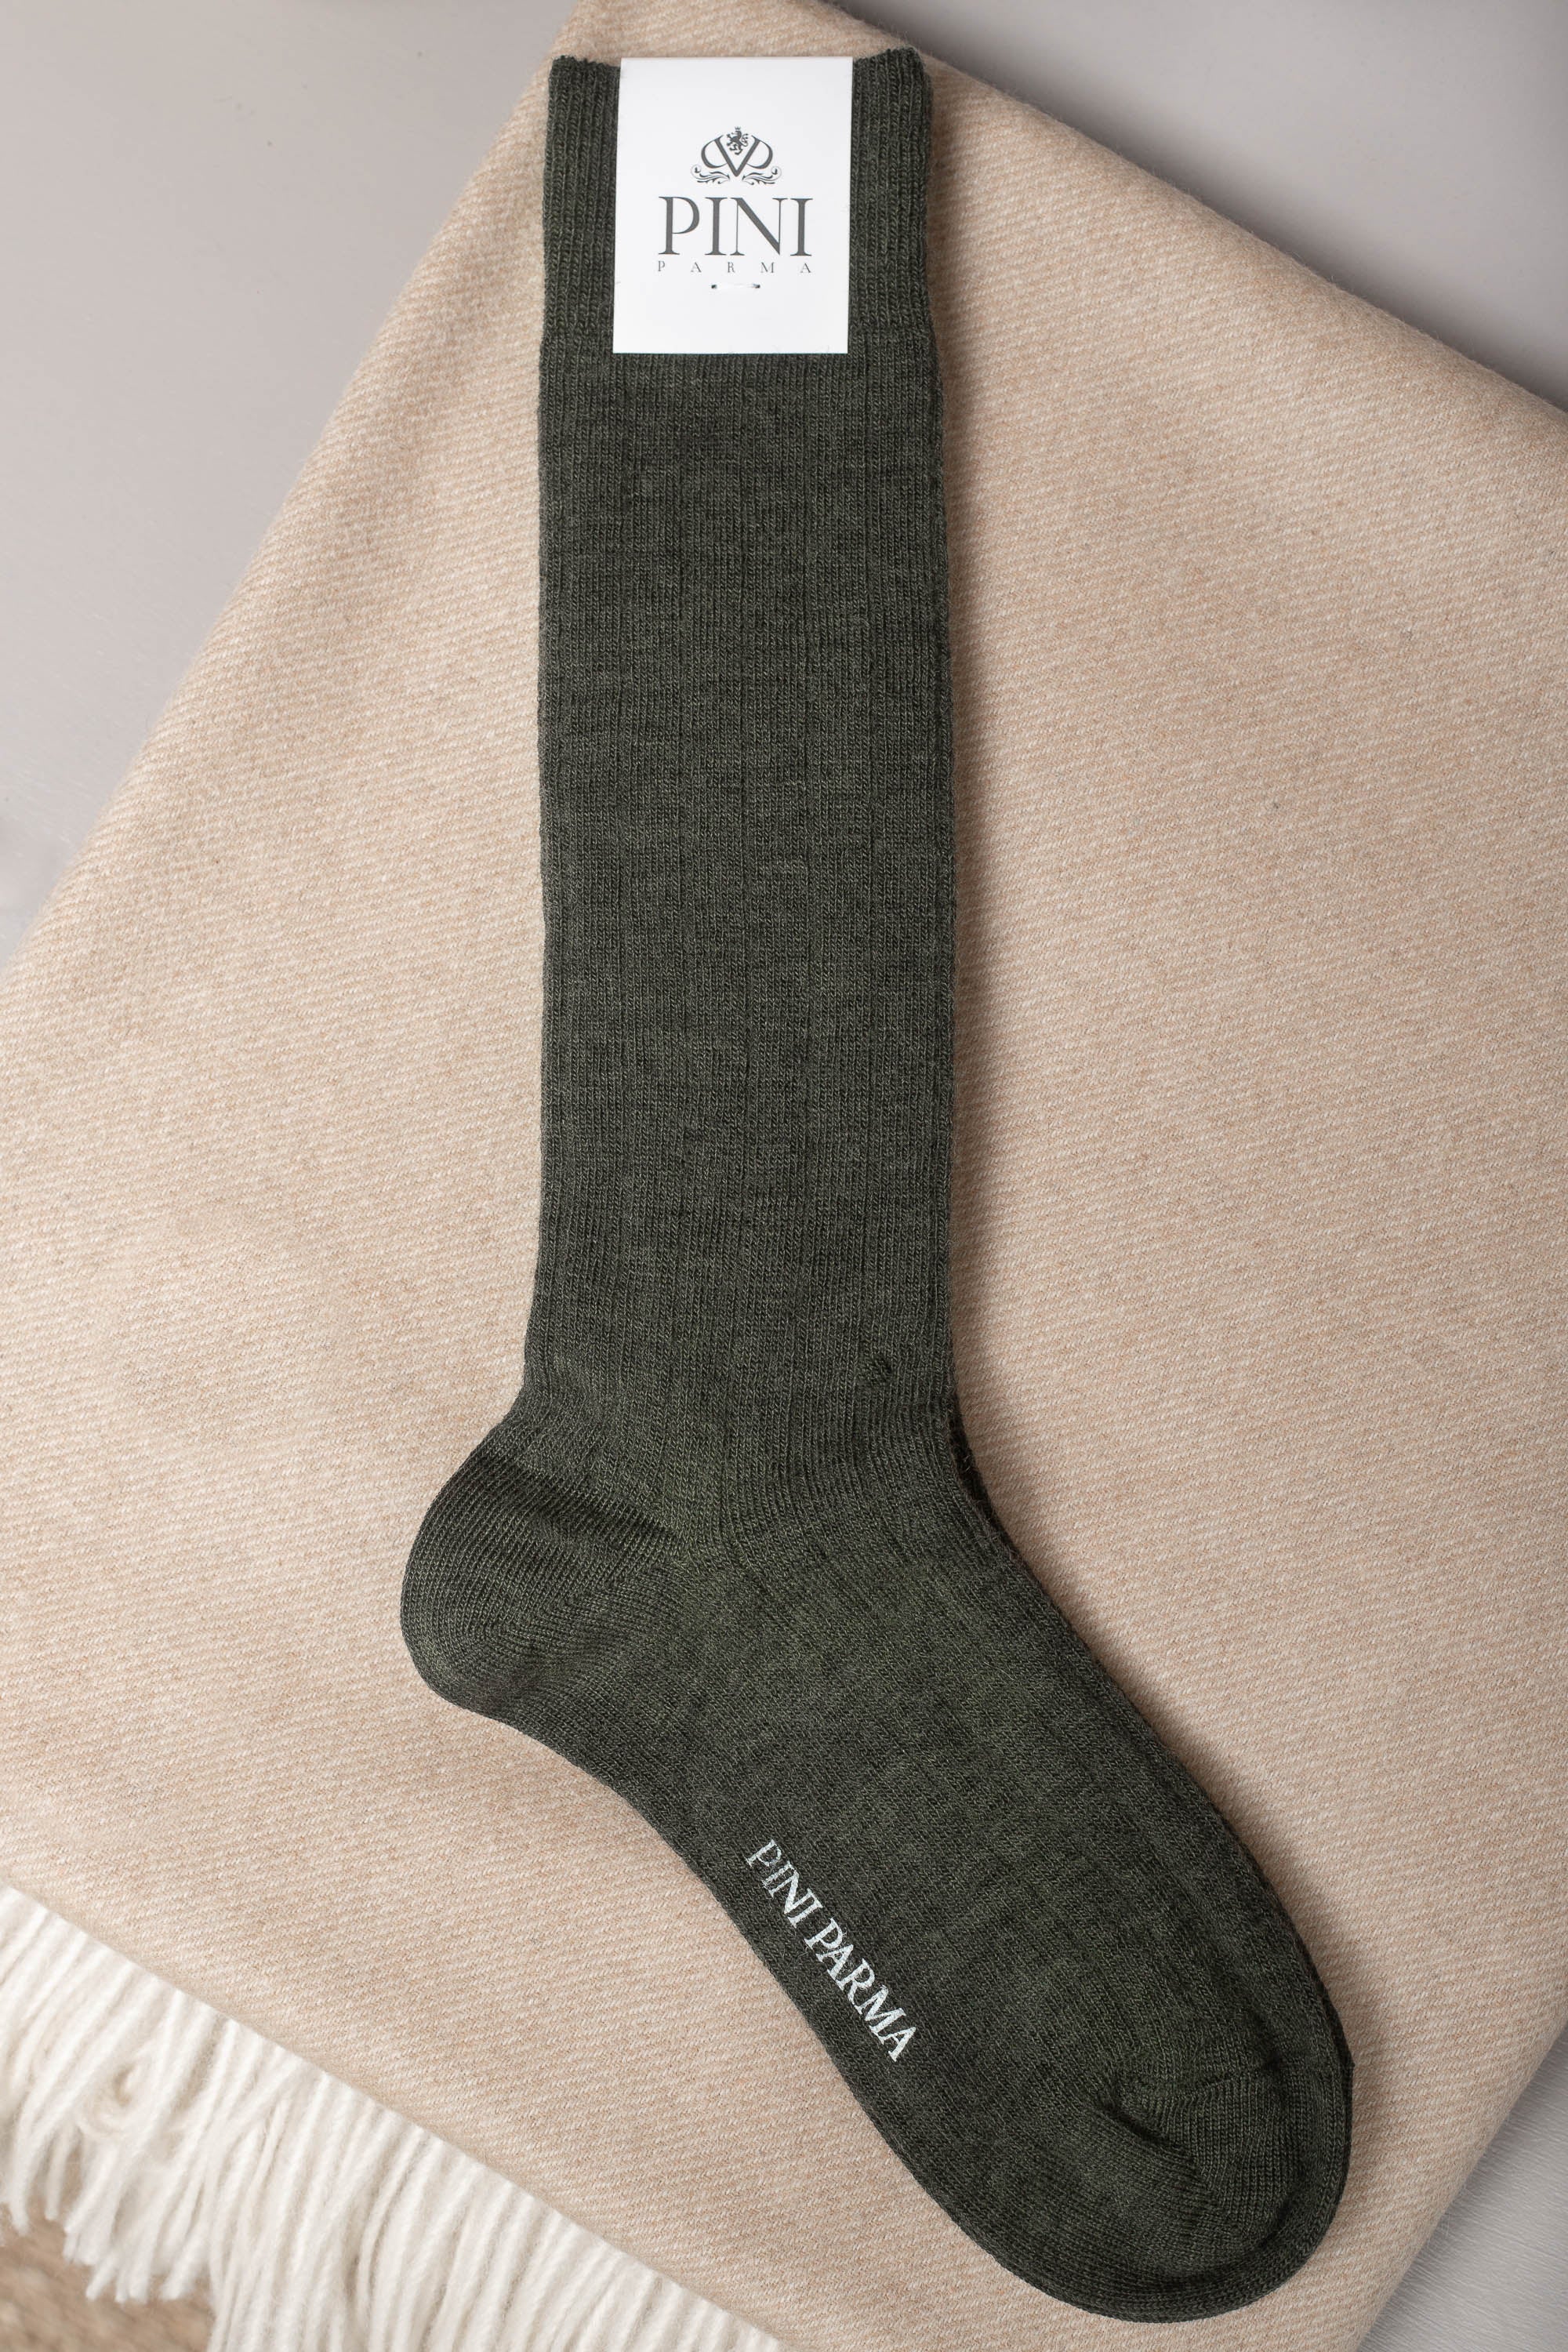 Green - Super durable Wool short socks - Made in Italy